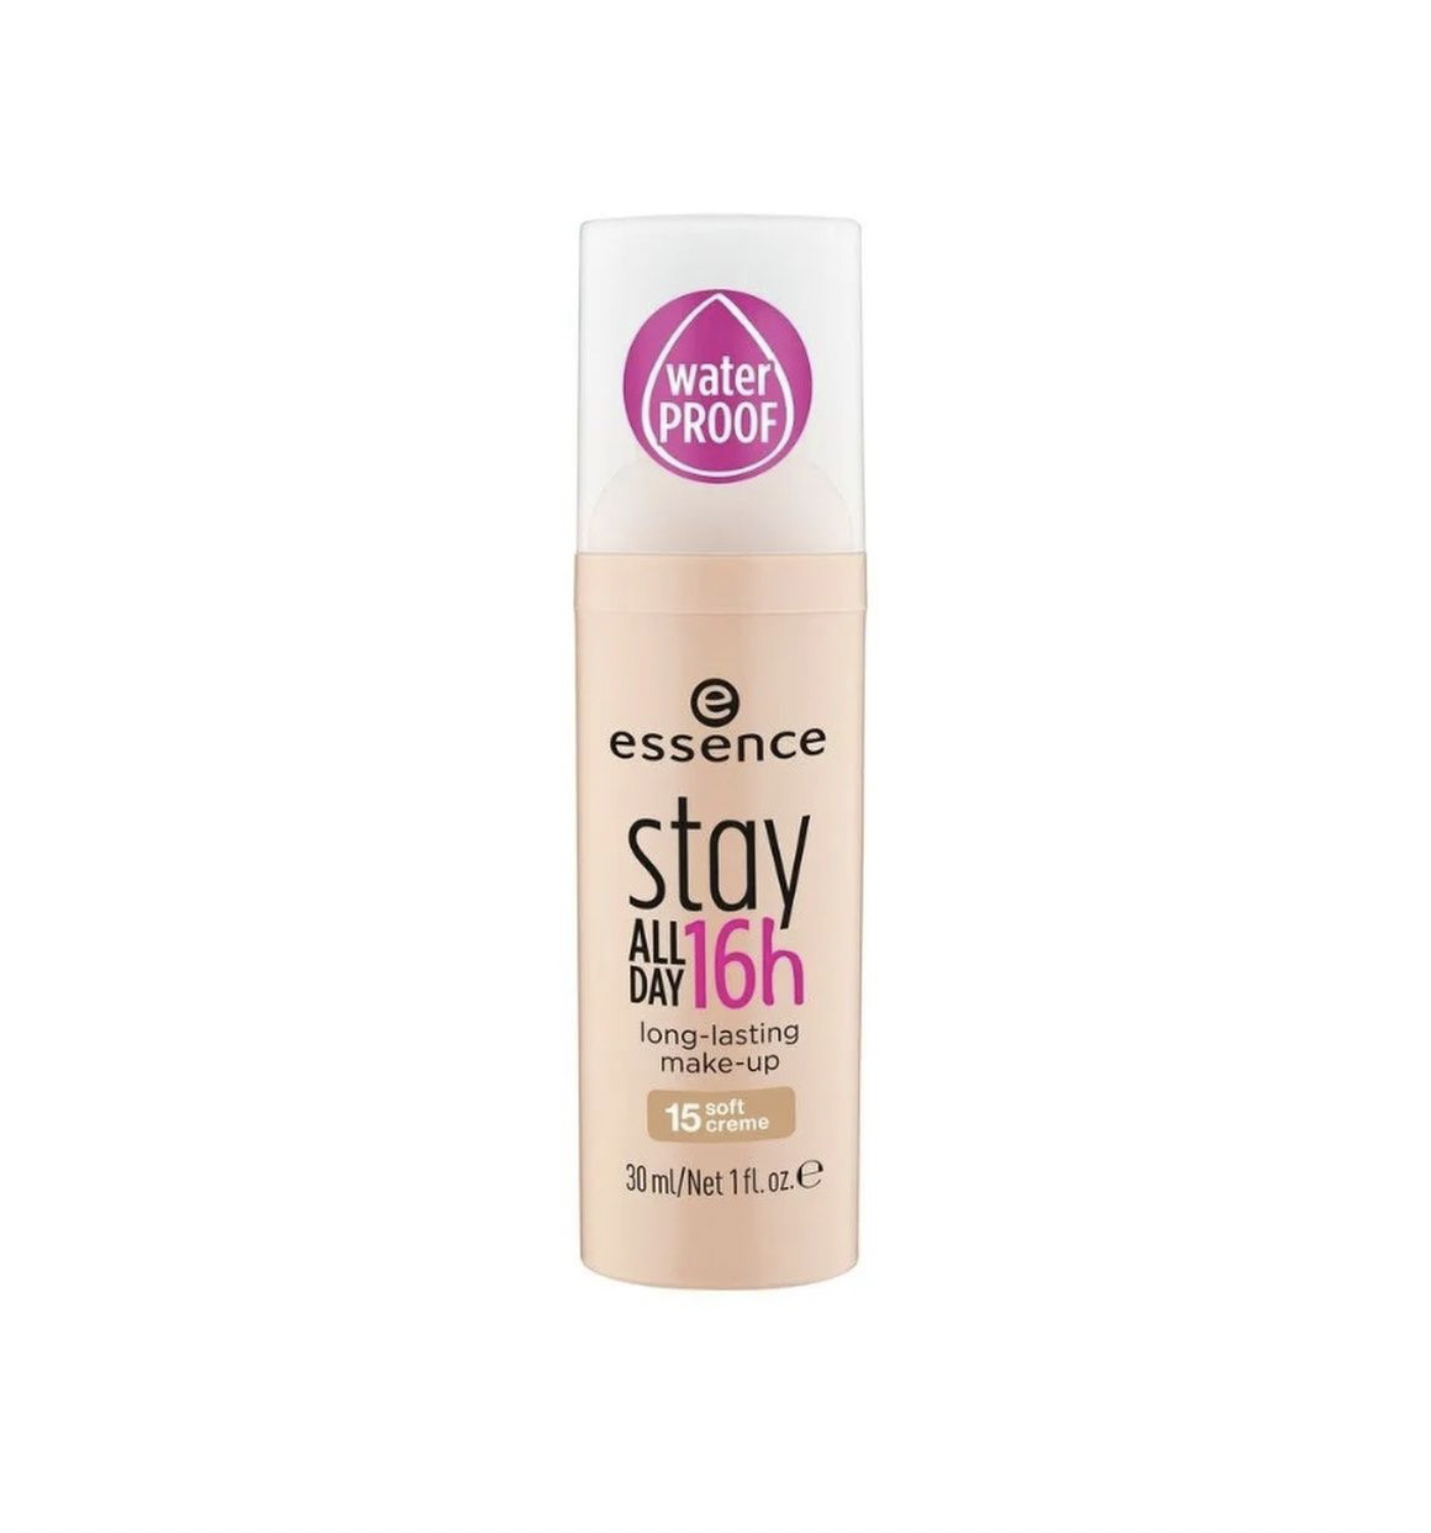   / Essence -   Stay All Day 16H long-lasting  15 Soft cream 30 